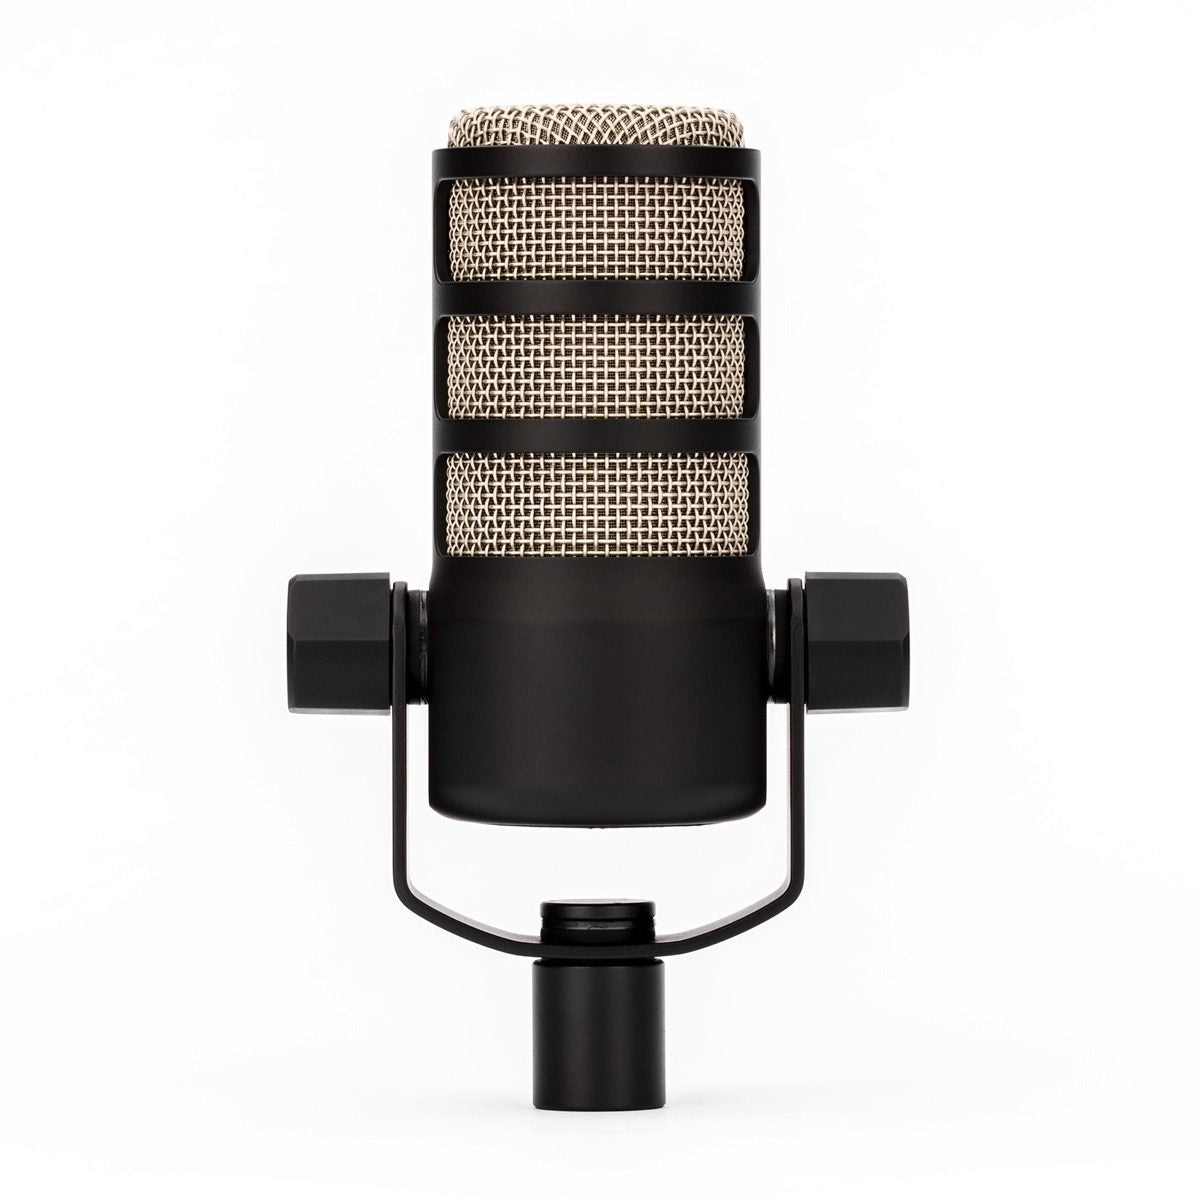 Rode PodMic Cardioid Dynamic Podcast Microphone